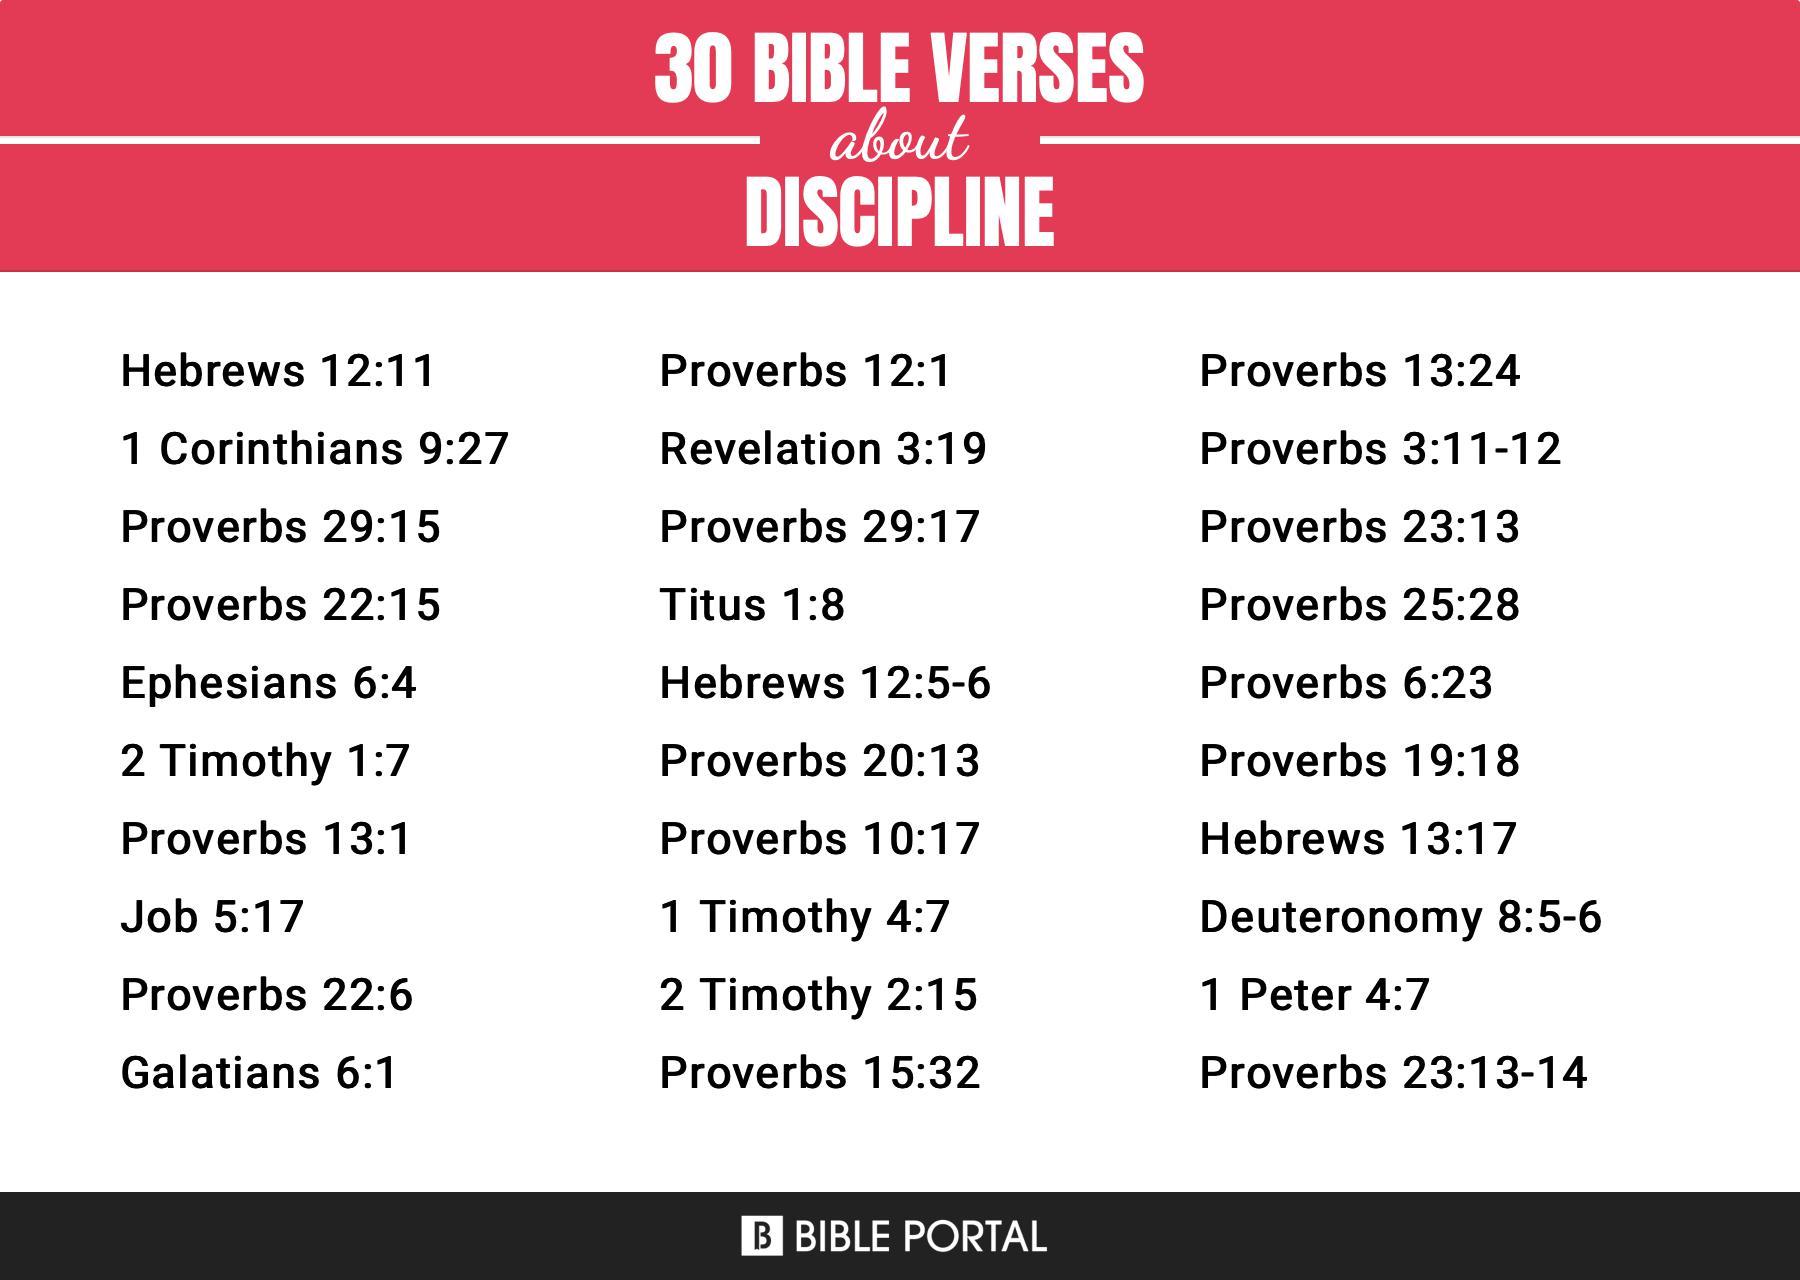 What Does the Bible Say about Discipline?